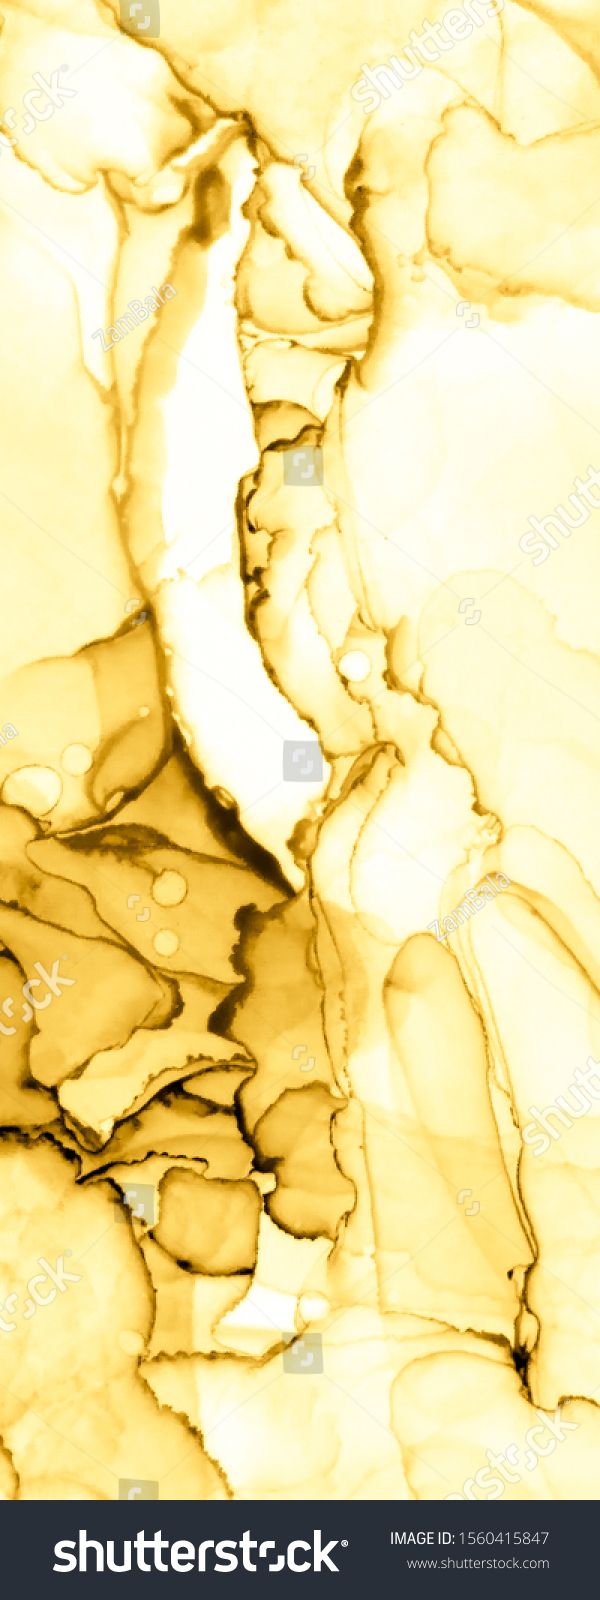 Ink Wash Pastel Texture Alcohol Art Light Gold Marble Stone